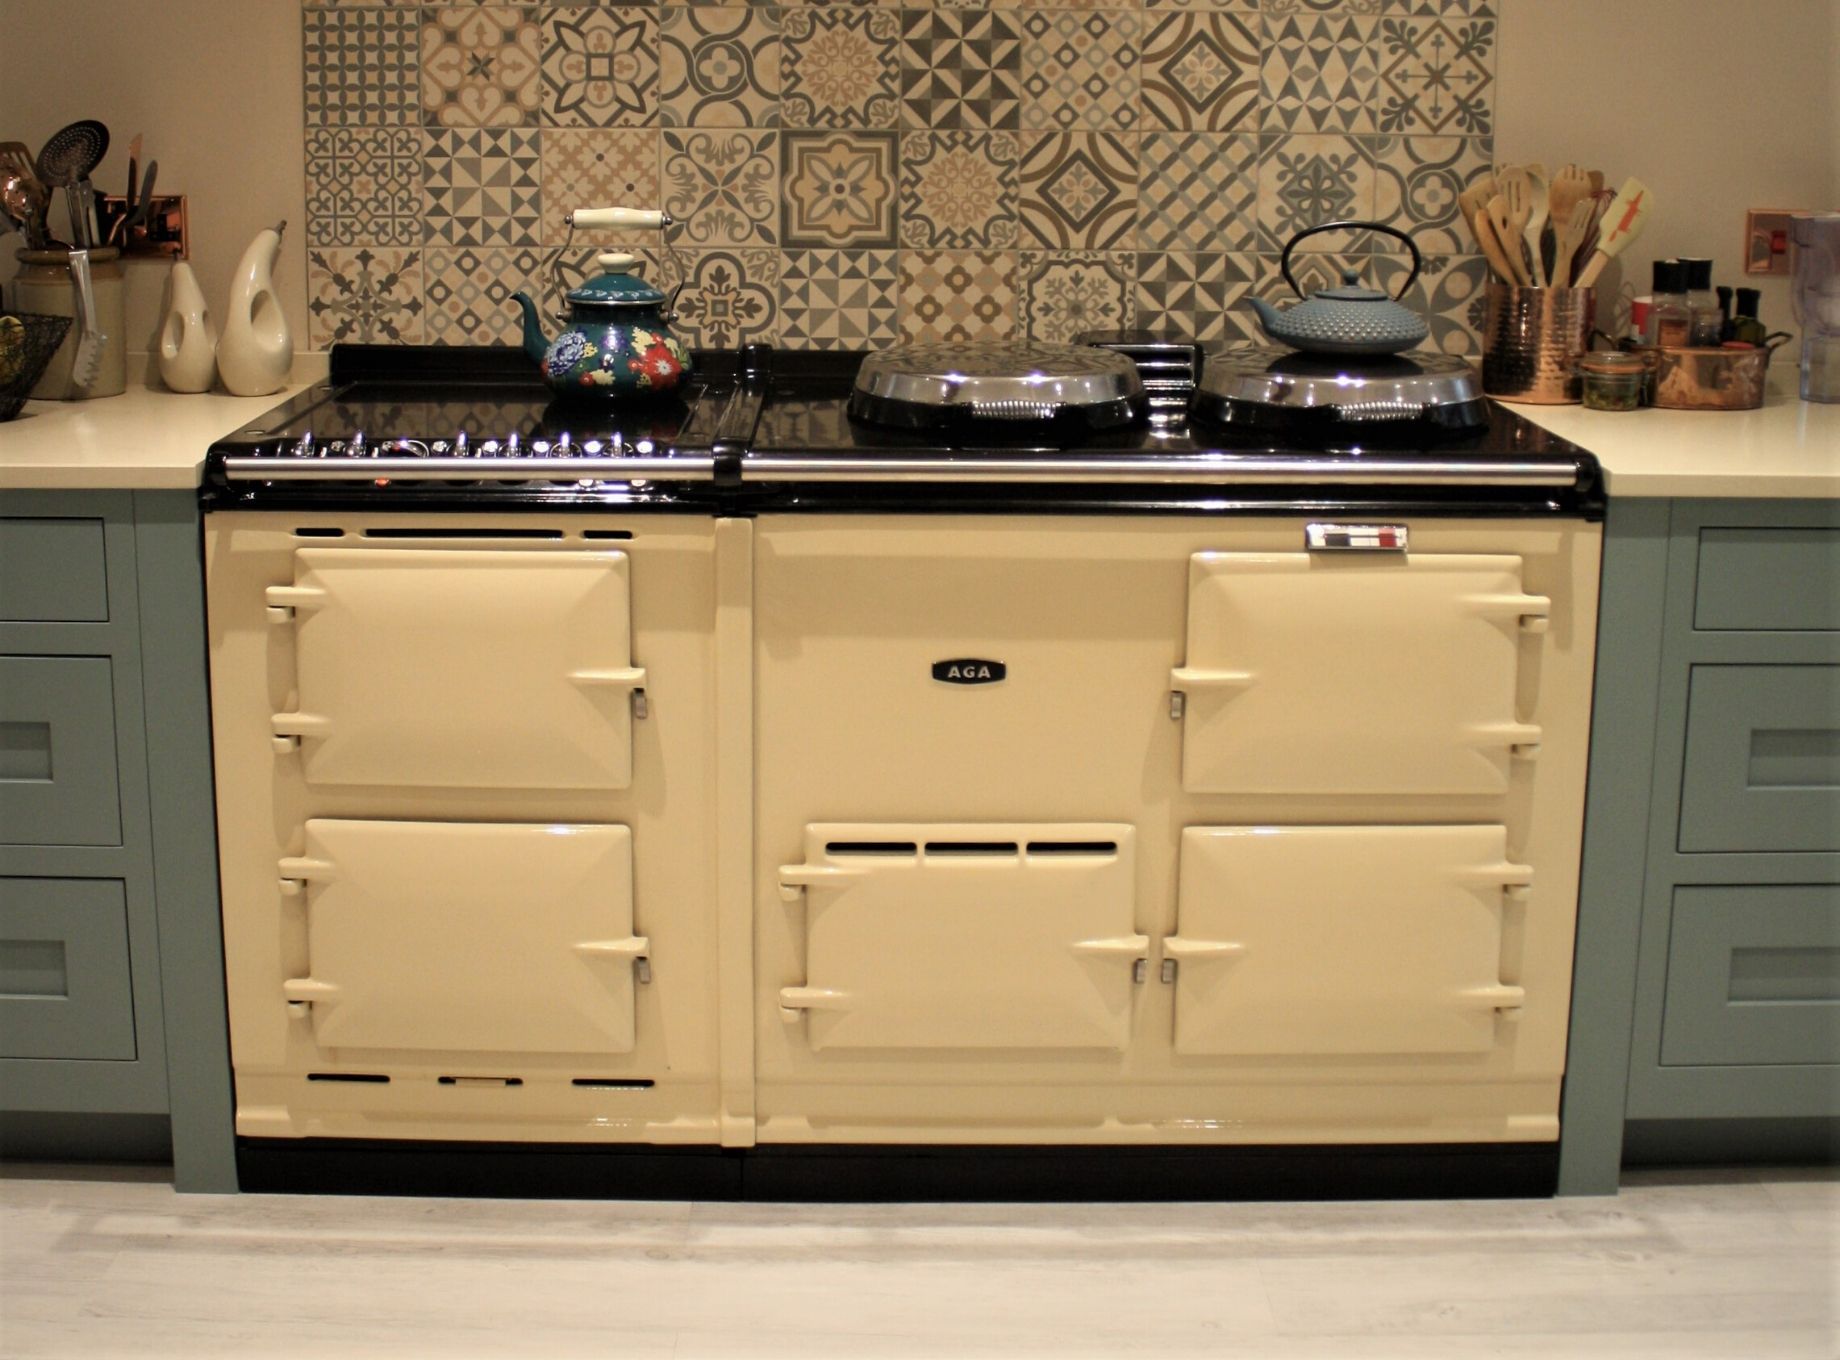 Reconditioned Aga cooker in kitchen designed and installed by Leger Interiors